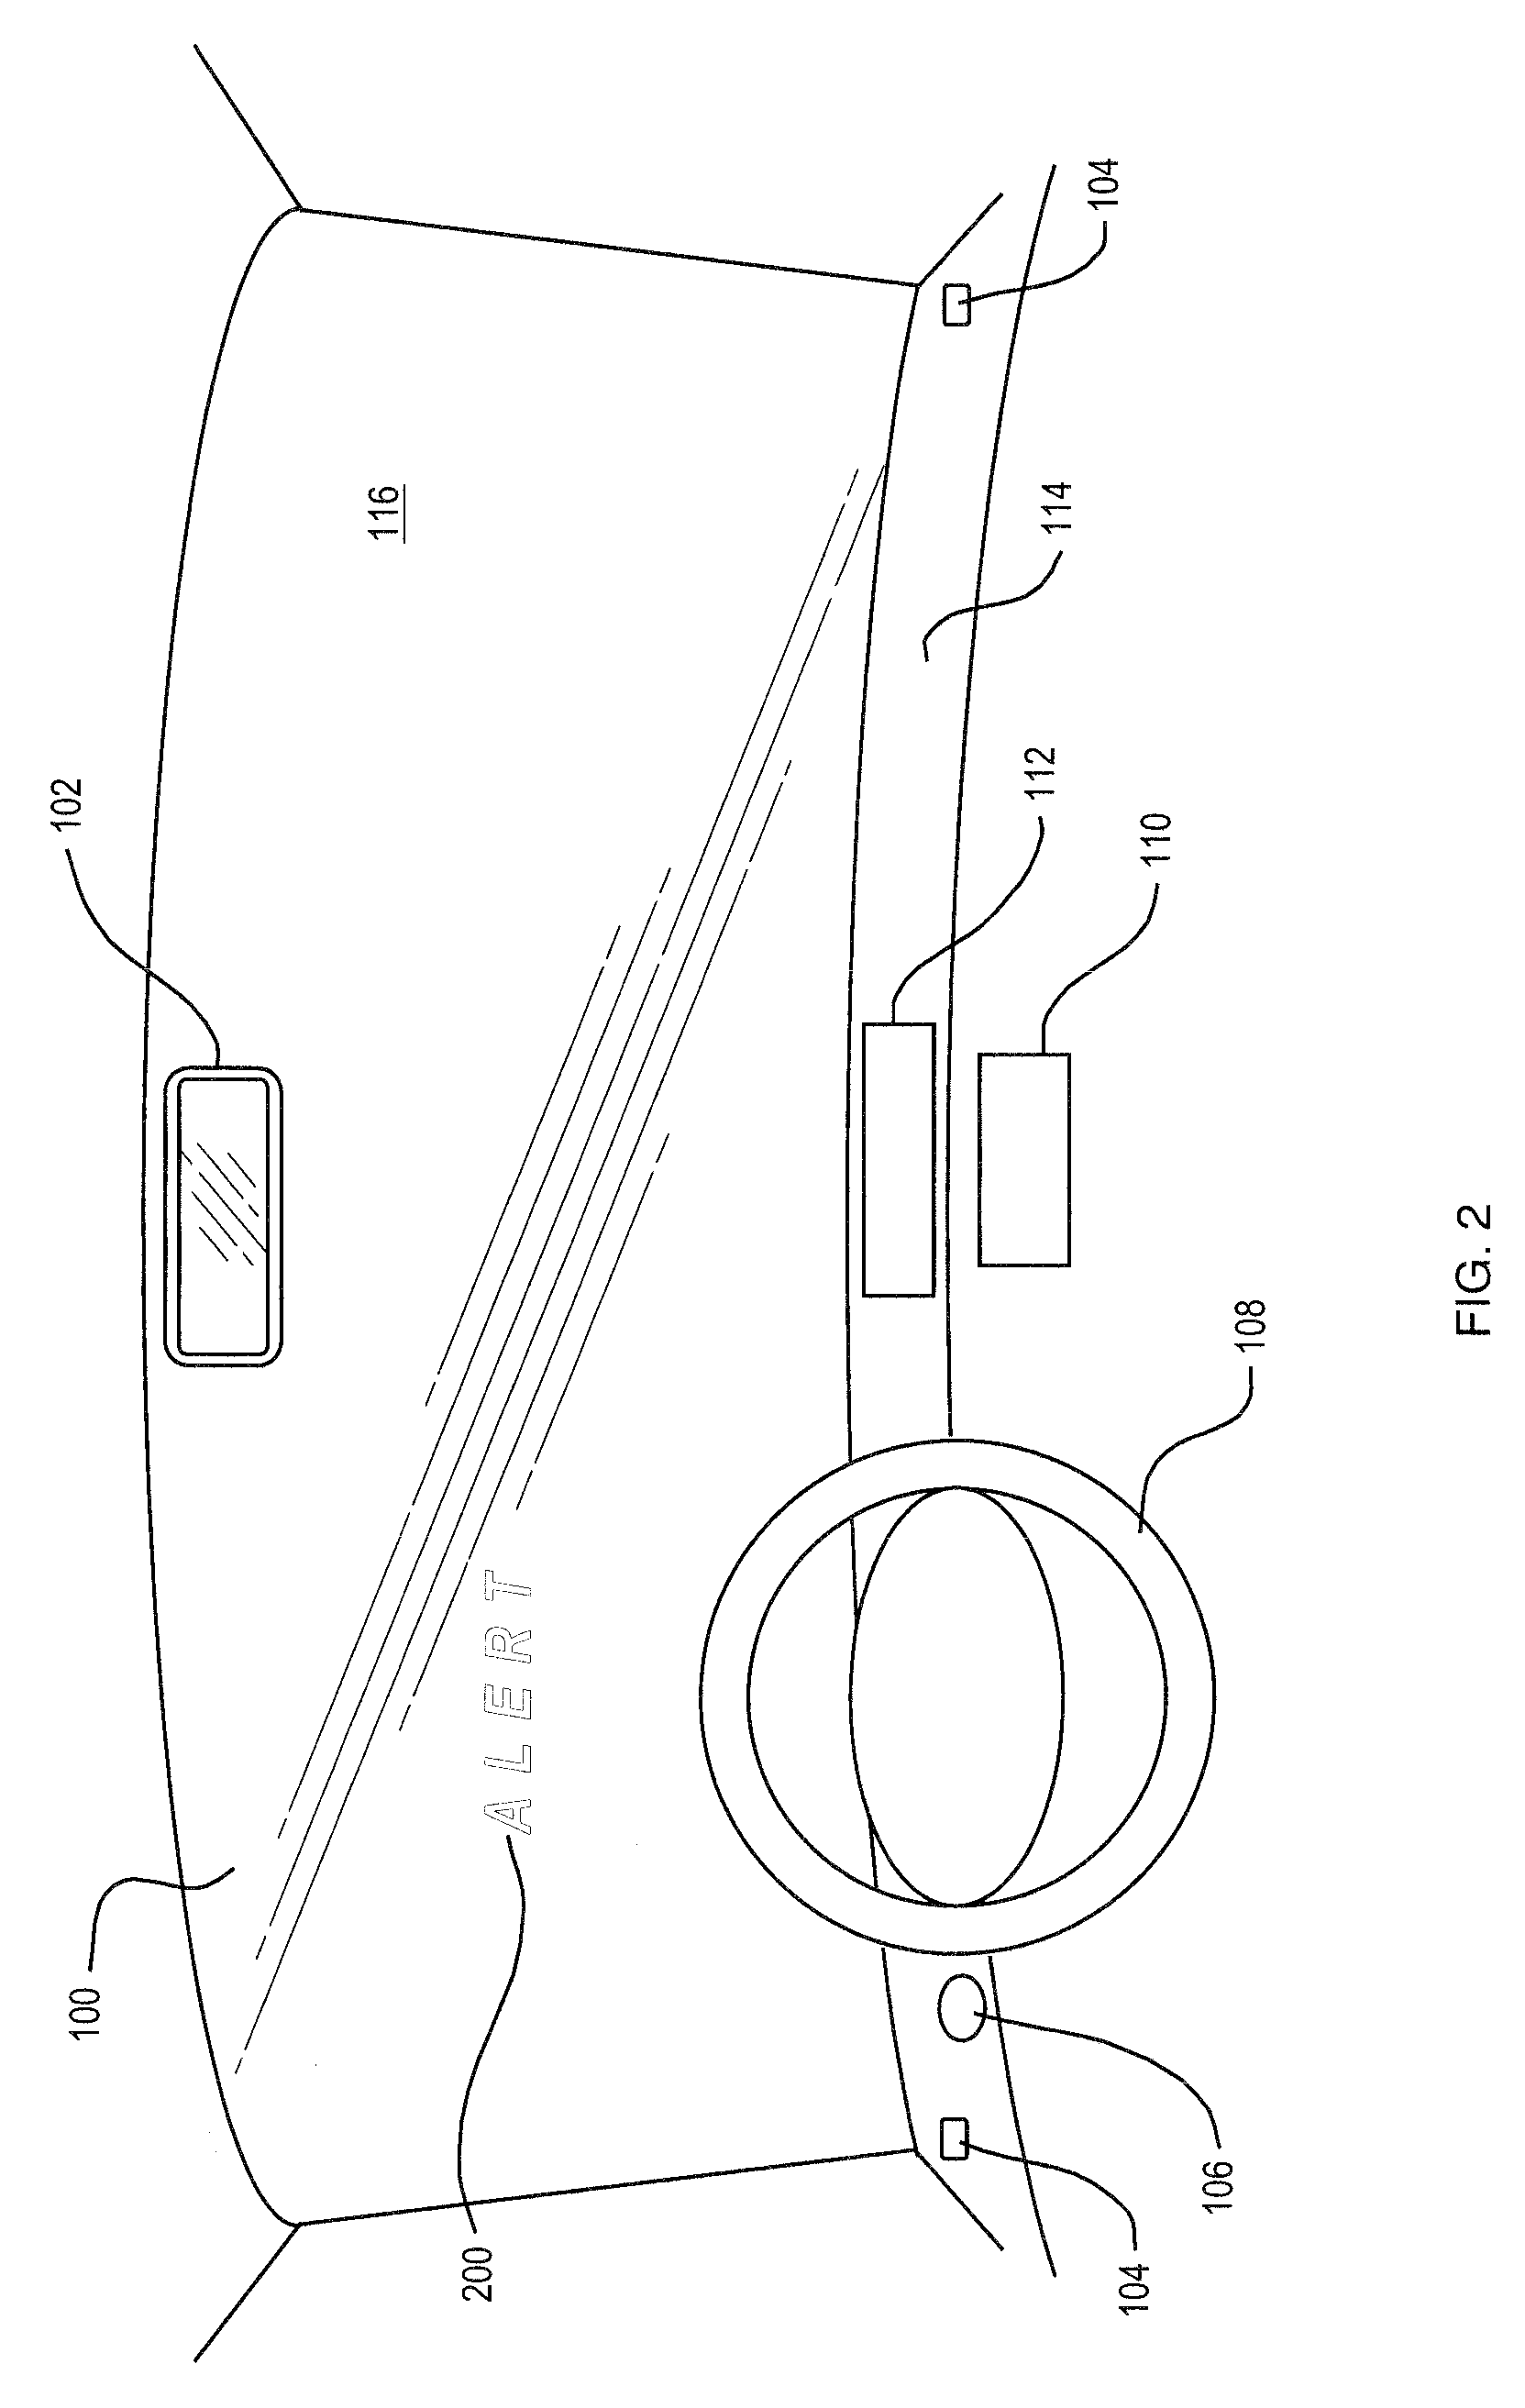 Digital windshield information system employing a recommendation engine keyed to a map database system